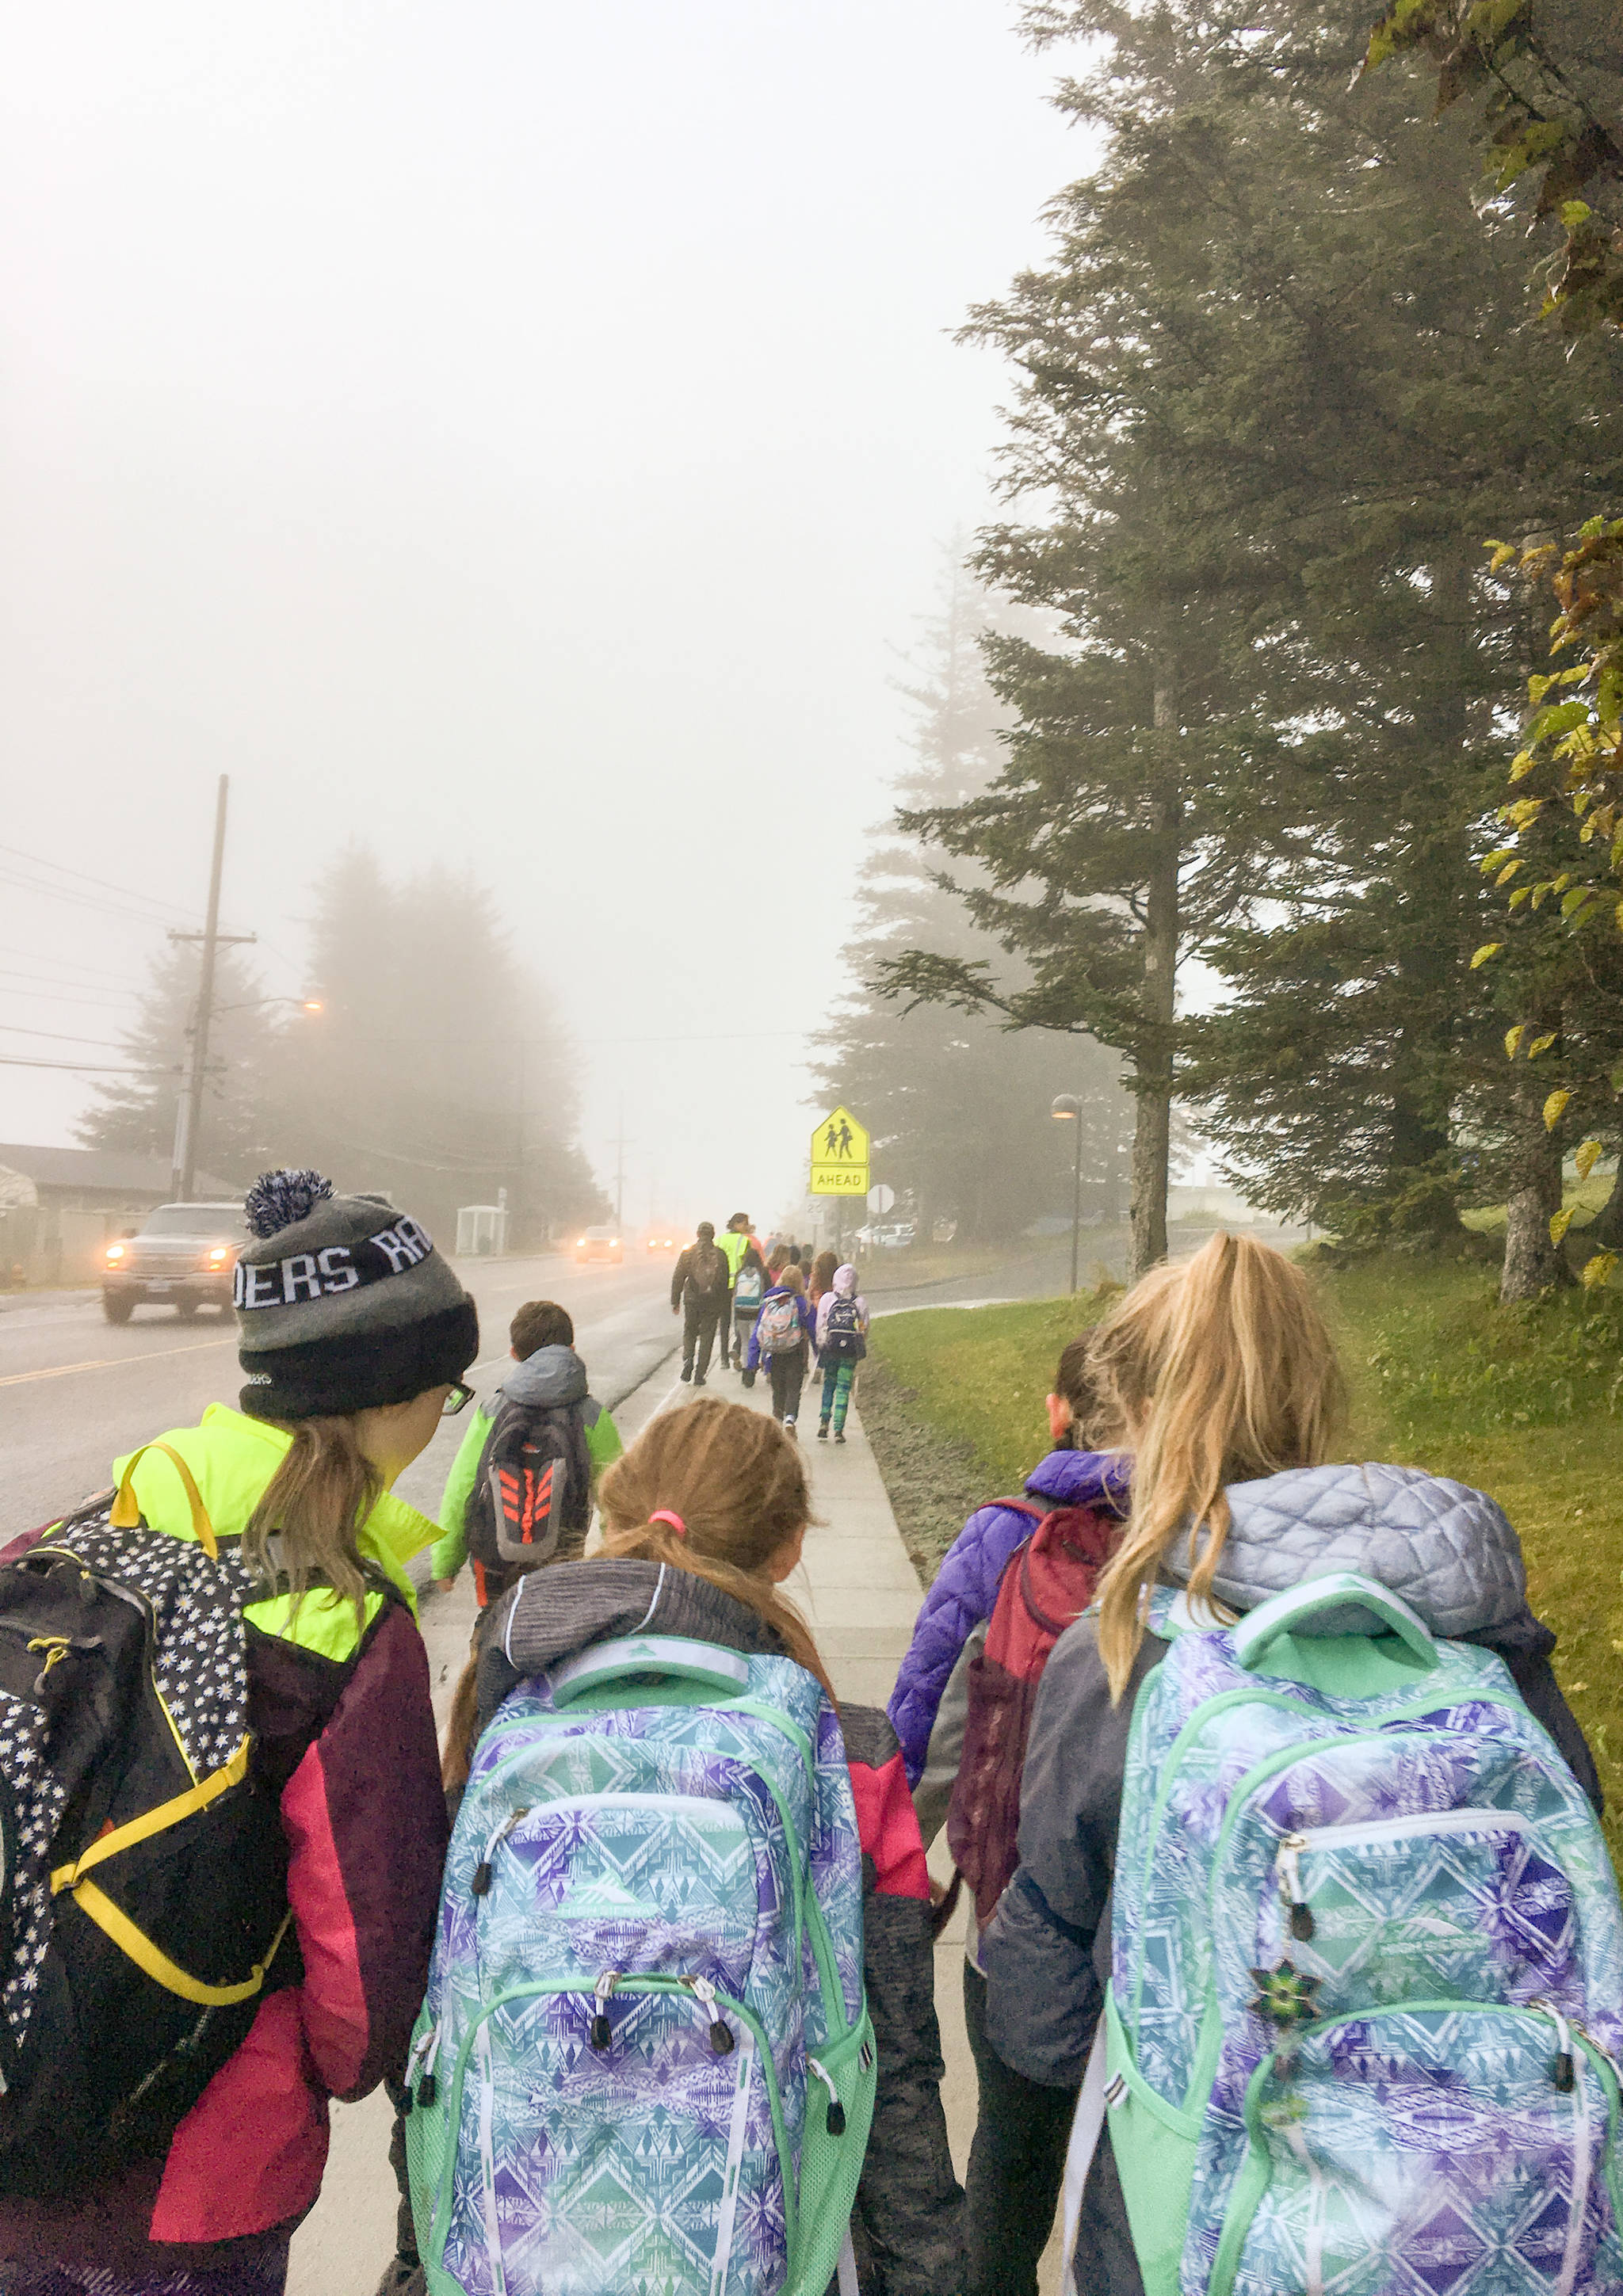 Students walk to the Gastineau School on Wednesday, Oct. 4 to celebrate International Walk to School Day. The day is meant to celebrate safe pedestrian schools and remind drivers to be aware of those walking to school. (Photo courtesy of Marcheta Moulton)